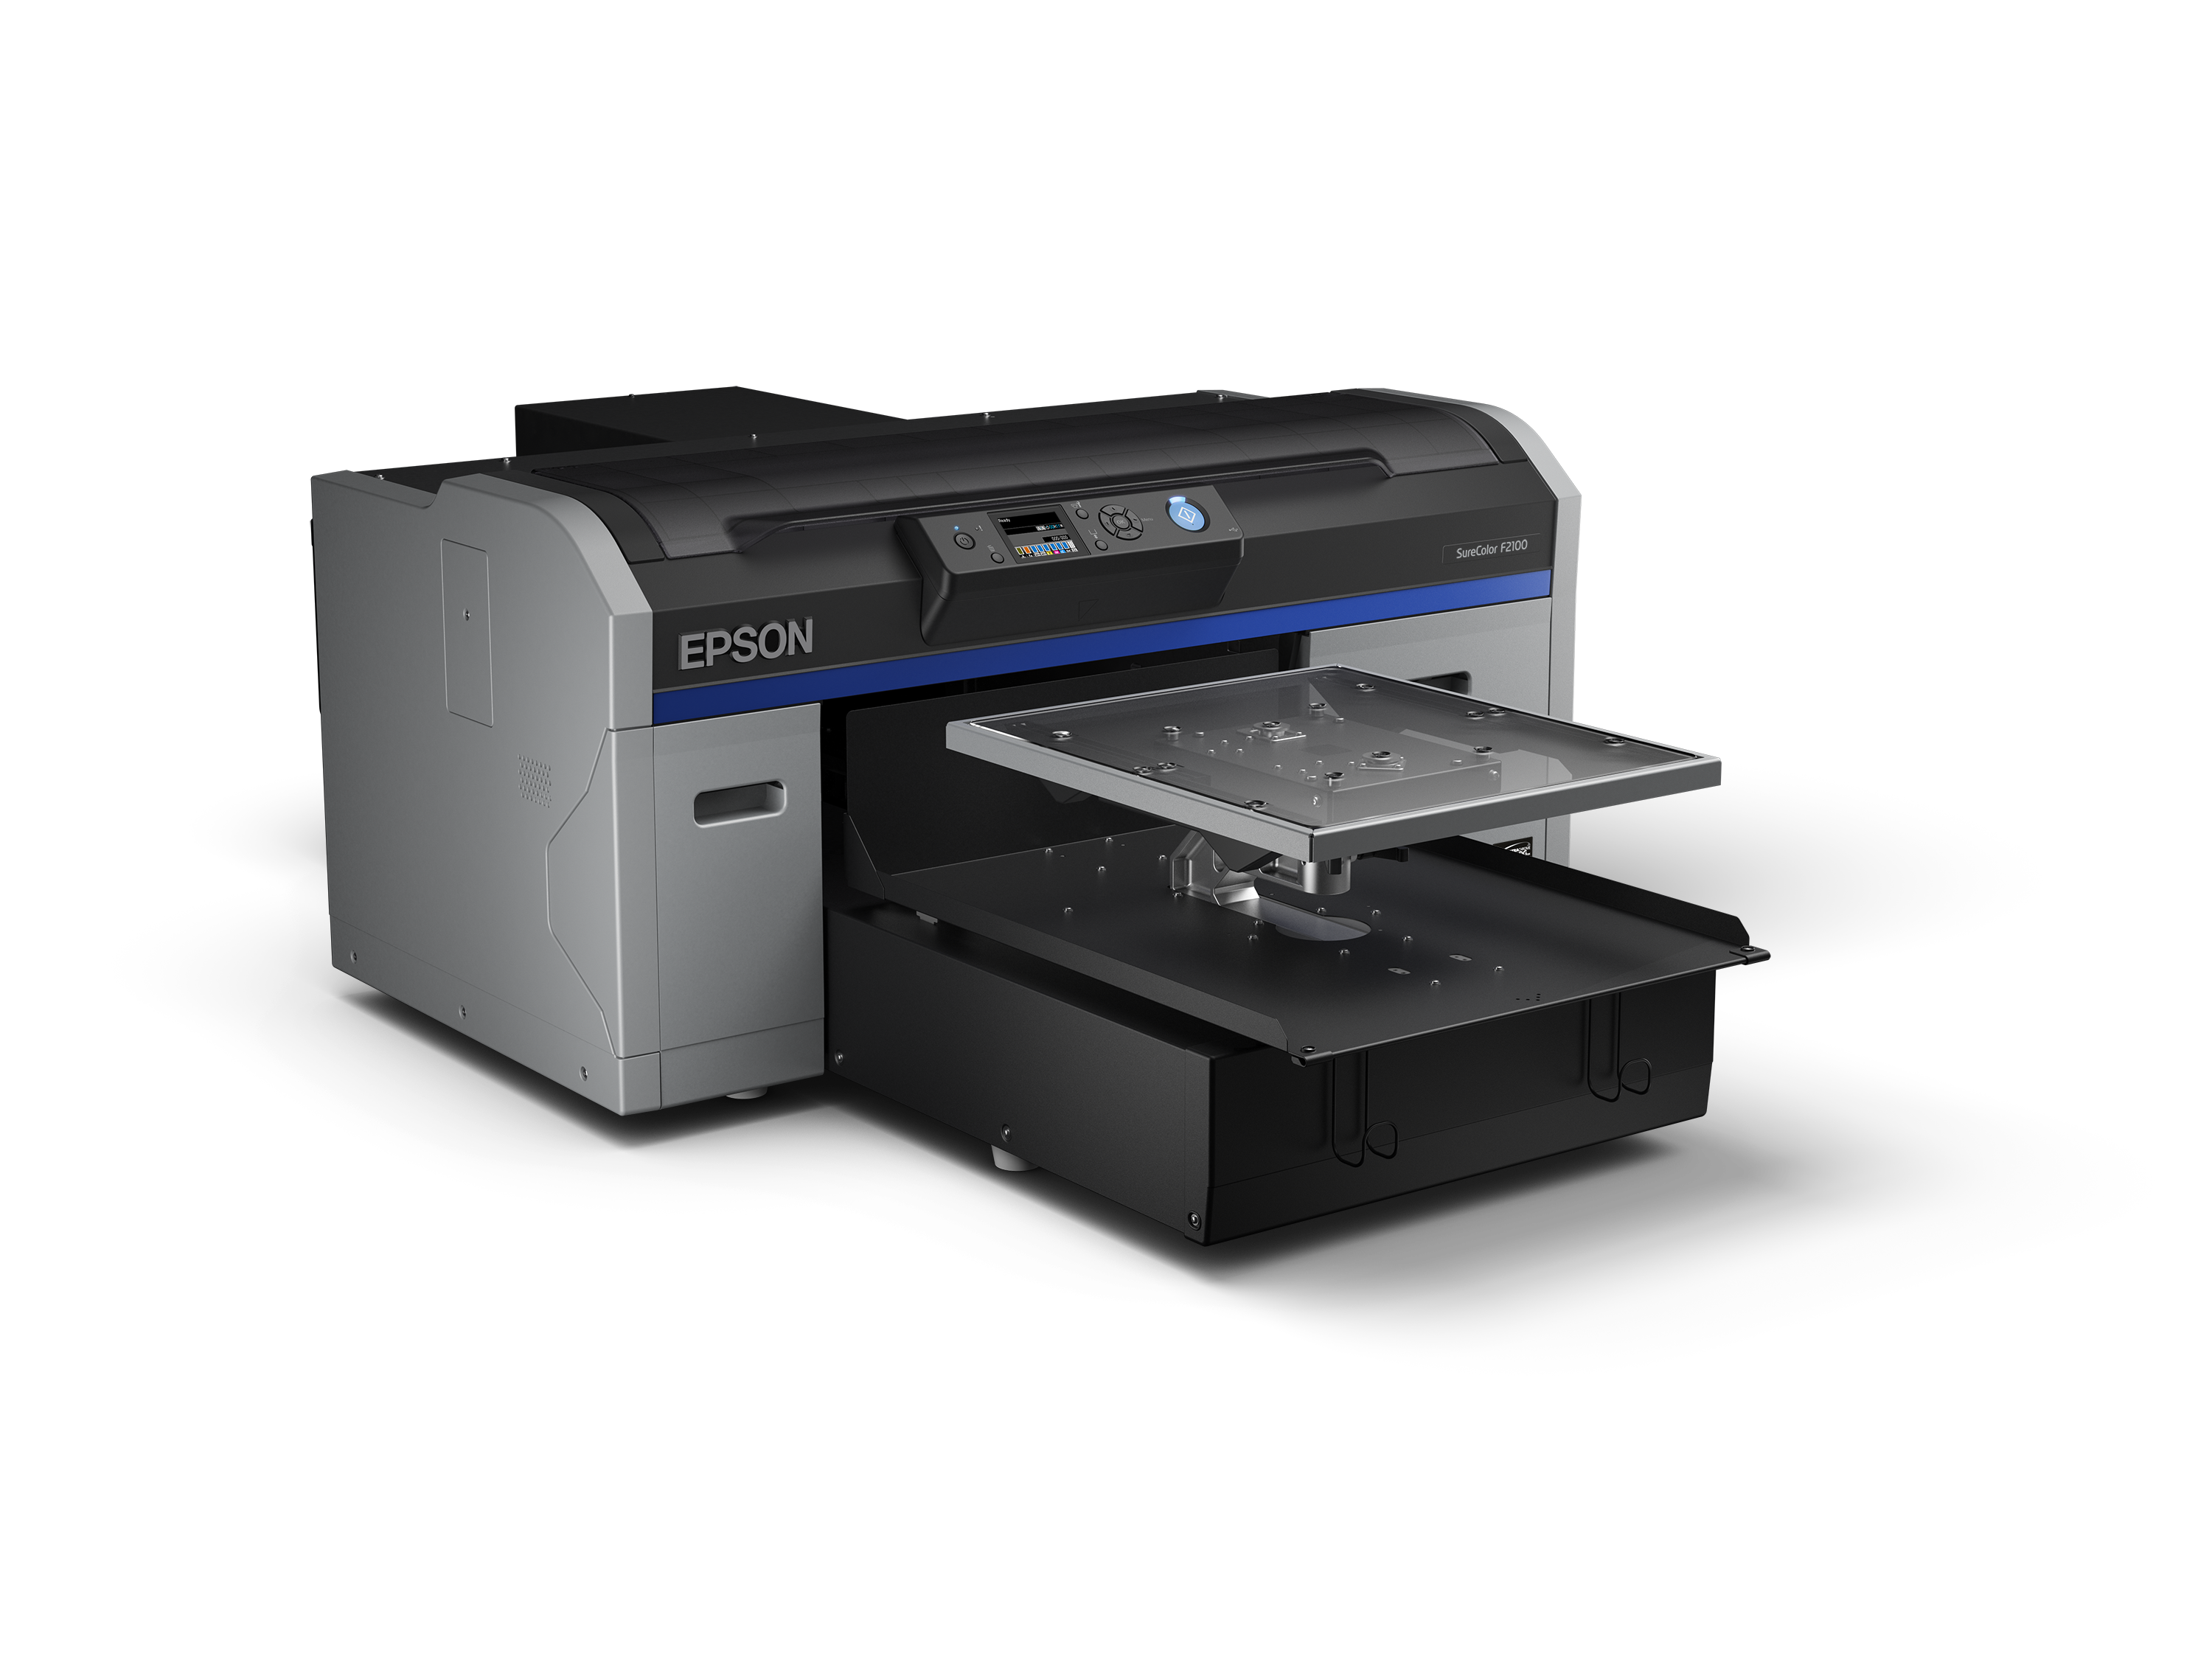 Epson F2100 DTG Direct to Garment Printer side view